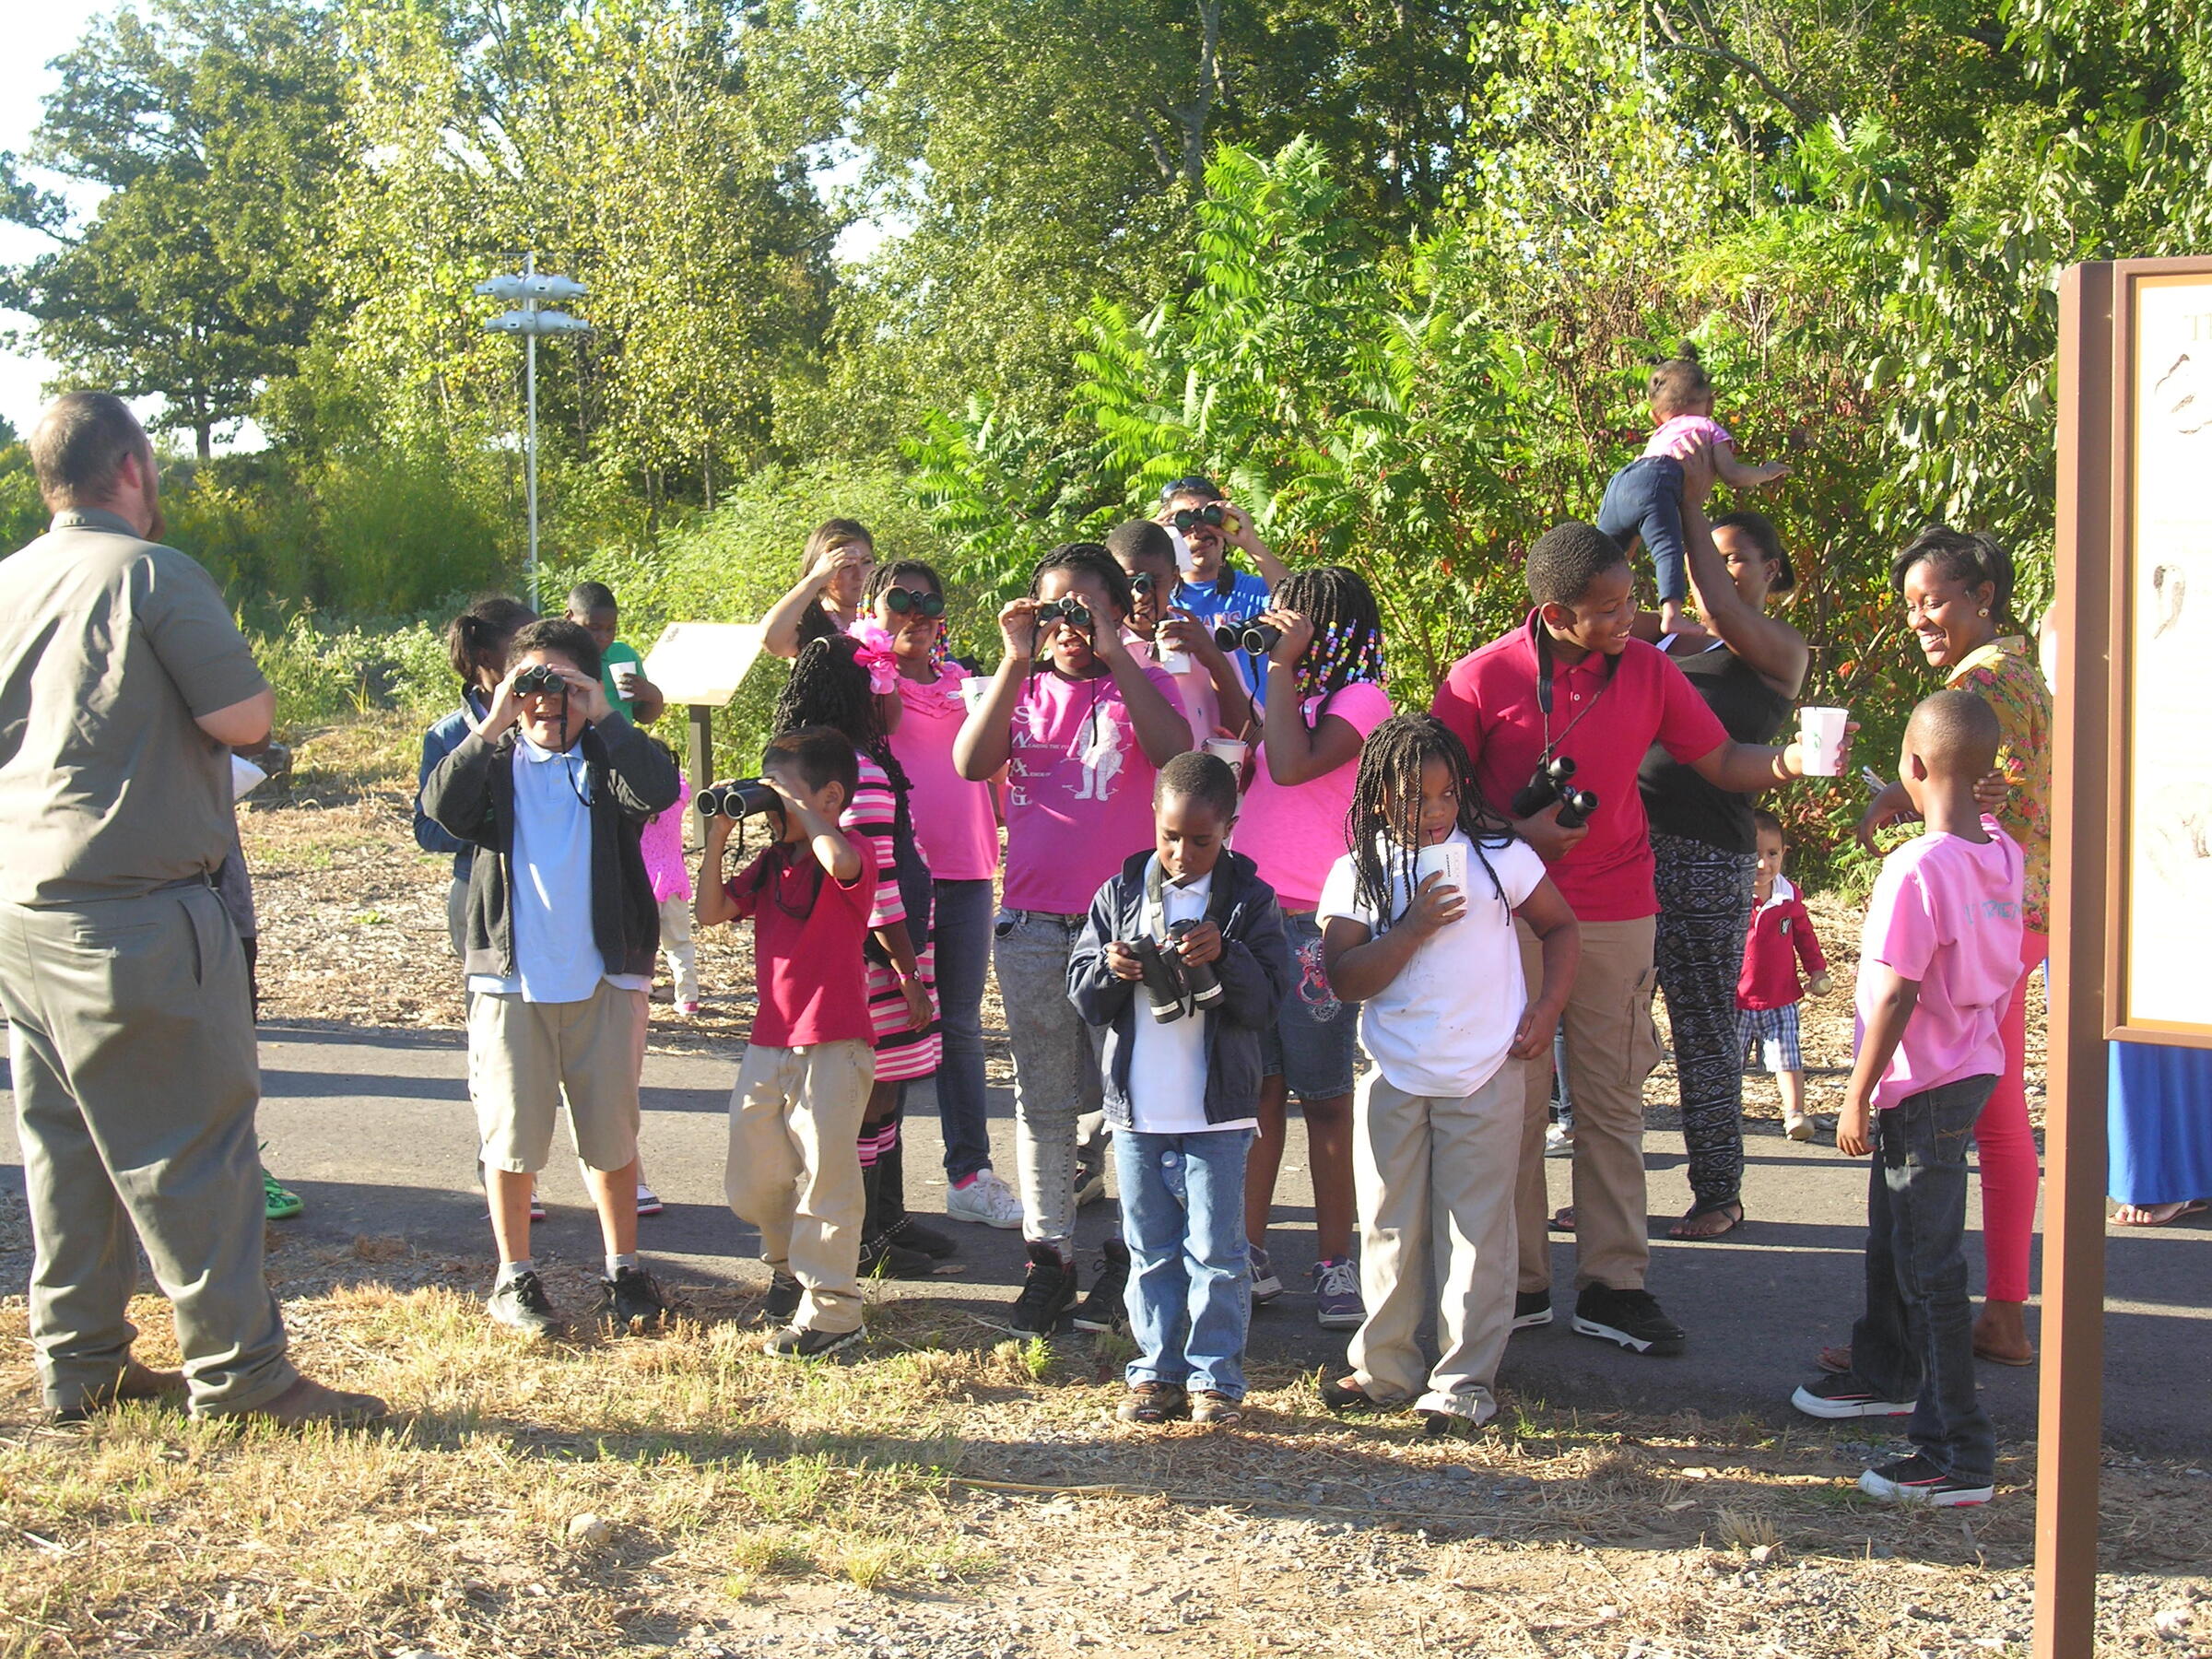 A group of kids and adults gather on a path while looking through binoculars.